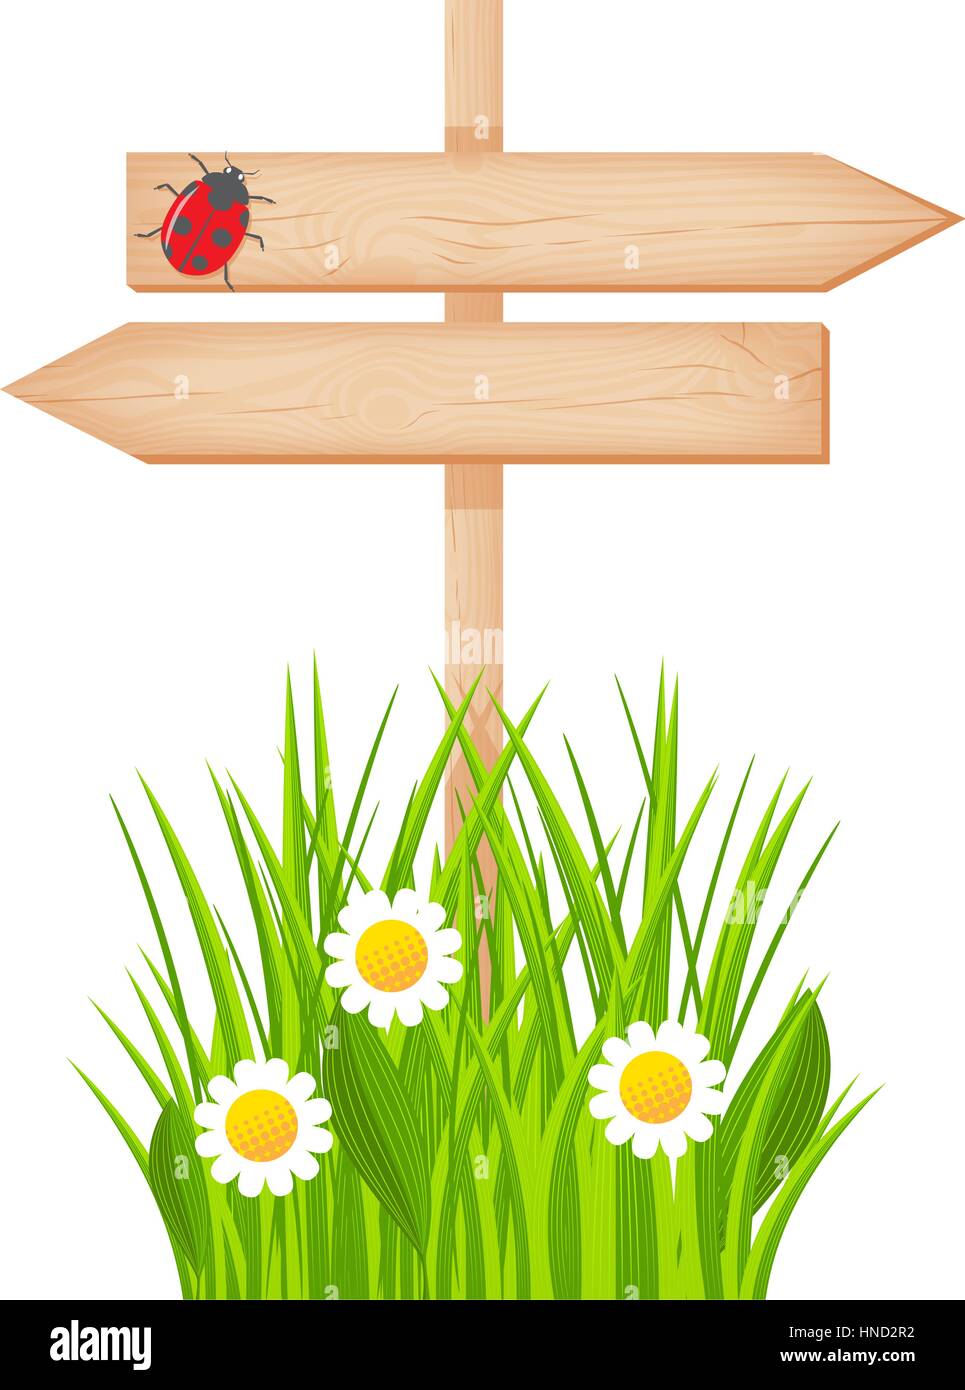 Wooden two arrows signboard with knots and cracks on a pole at the grass lawn with flowers and ladybug vector illustration Stock Vector